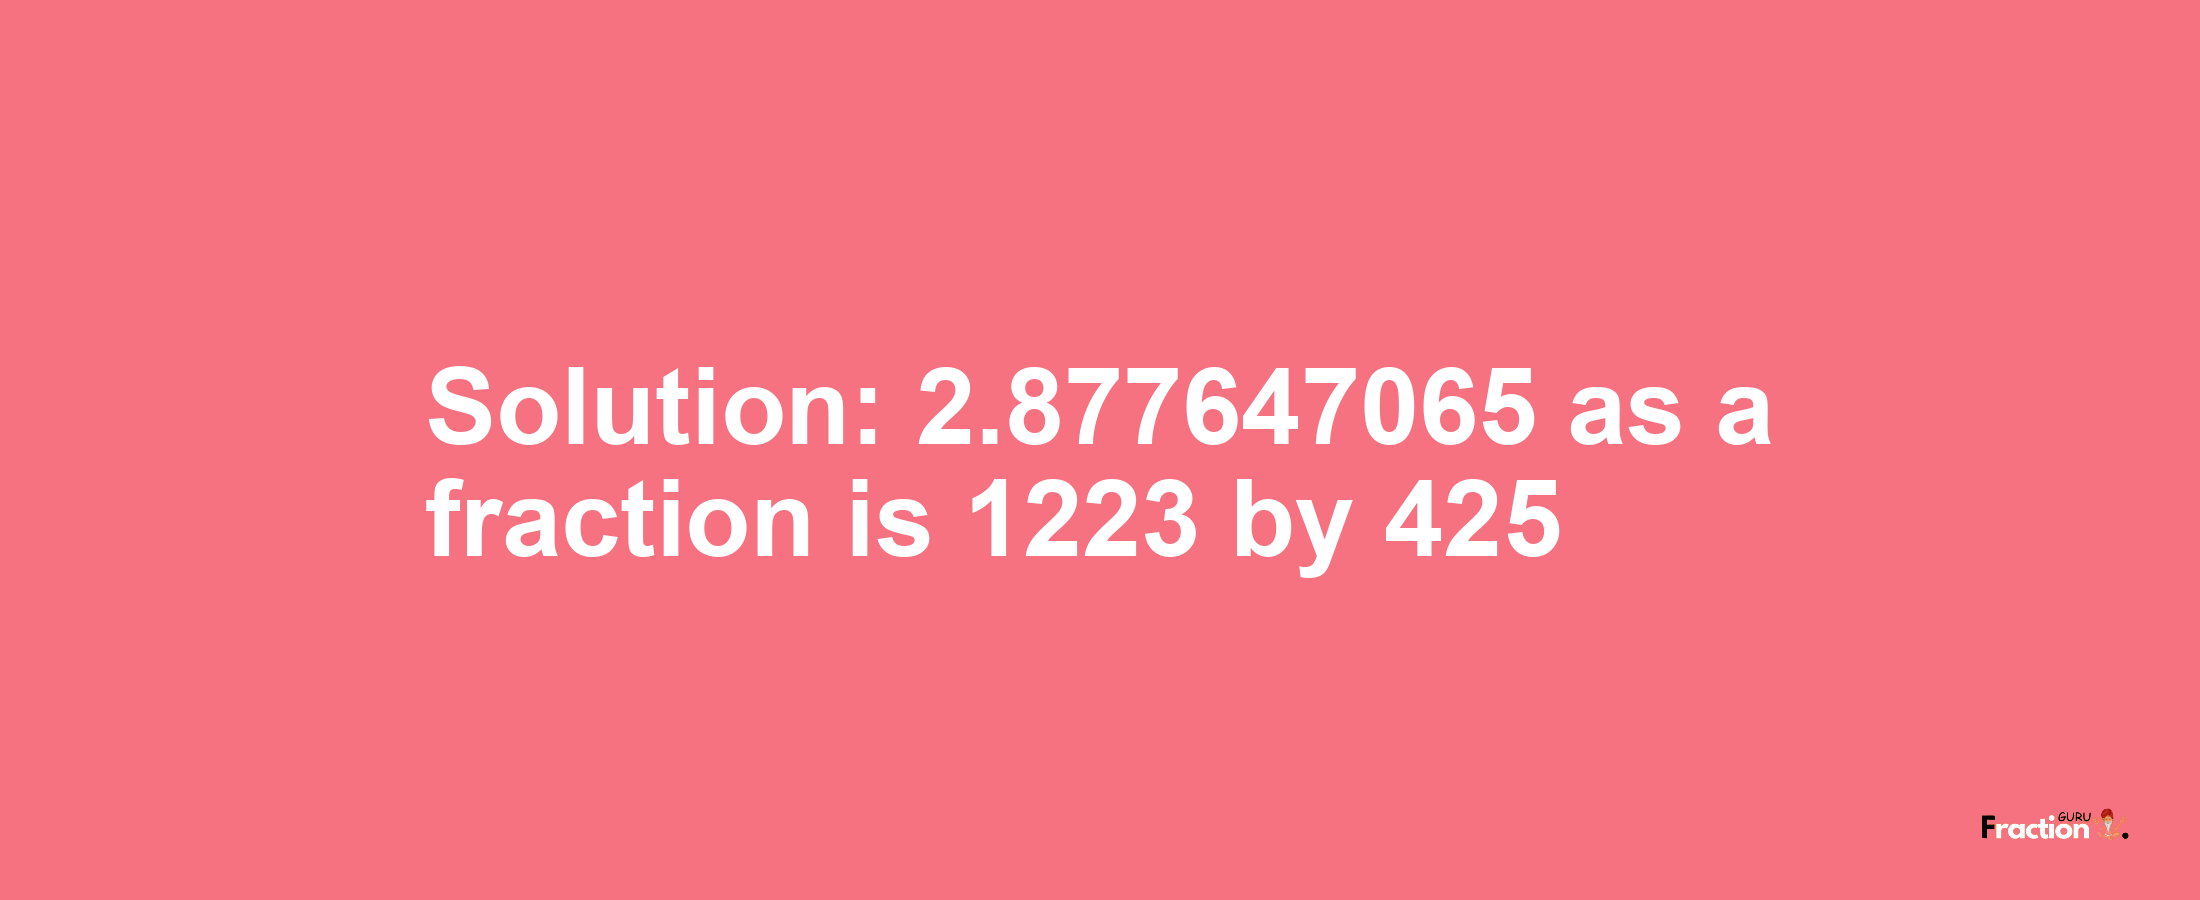 Solution:2.877647065 as a fraction is 1223/425